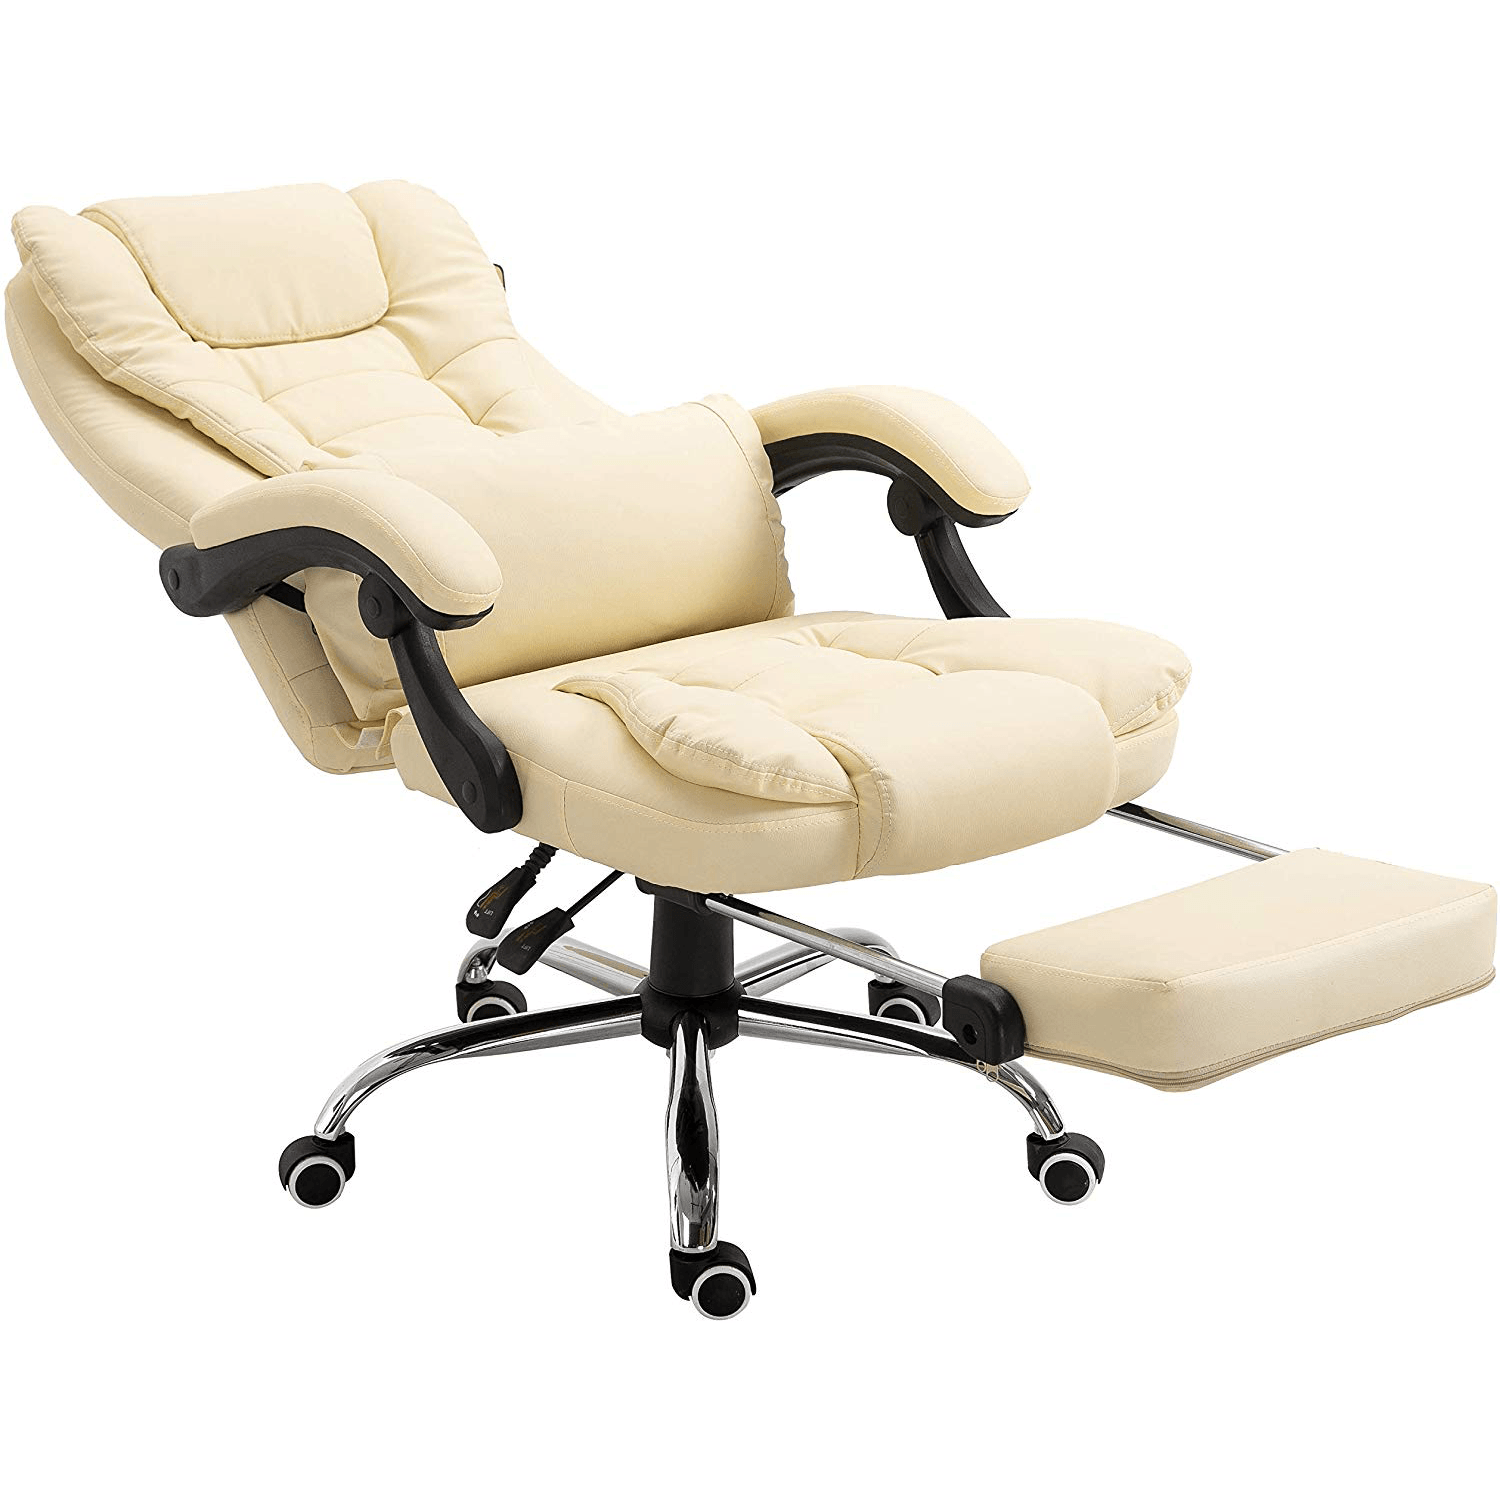 Executive Reclining Computer Desk Chair with Footrest, Headrest and Lumbar  Cushion Support Furniture, MR34 Grey Fabric